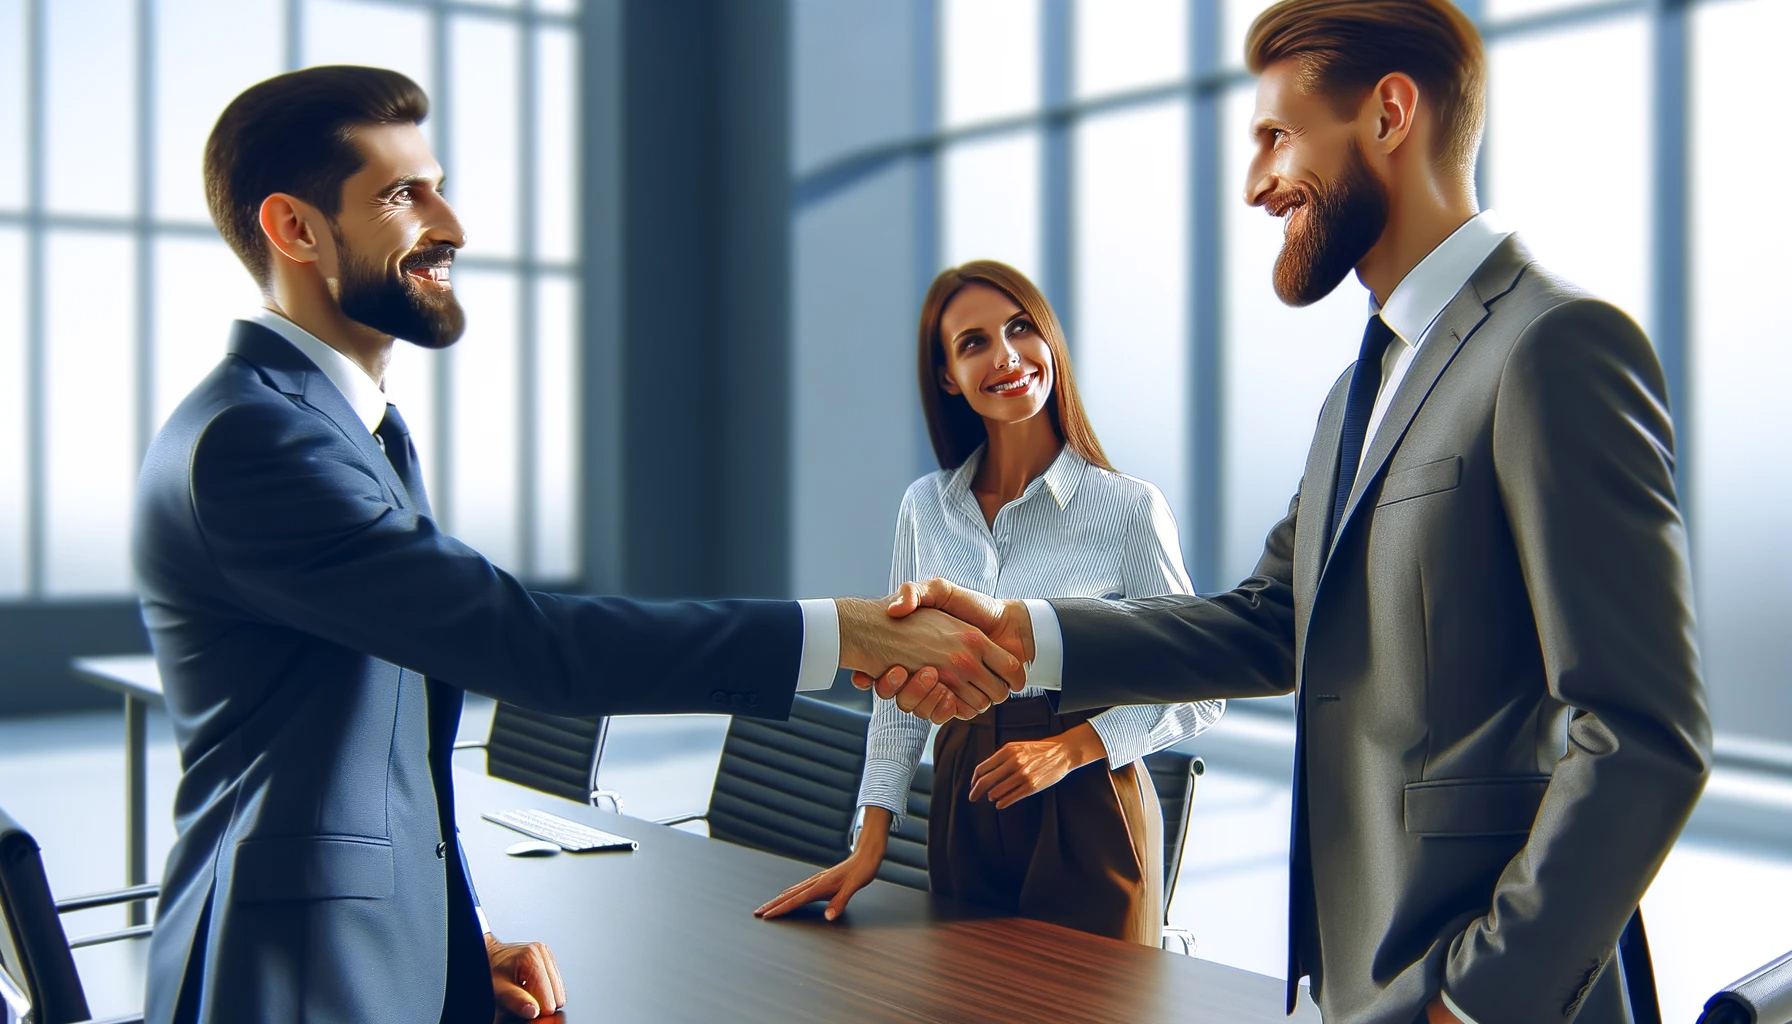 A sales agent in a management role hiring sales reps